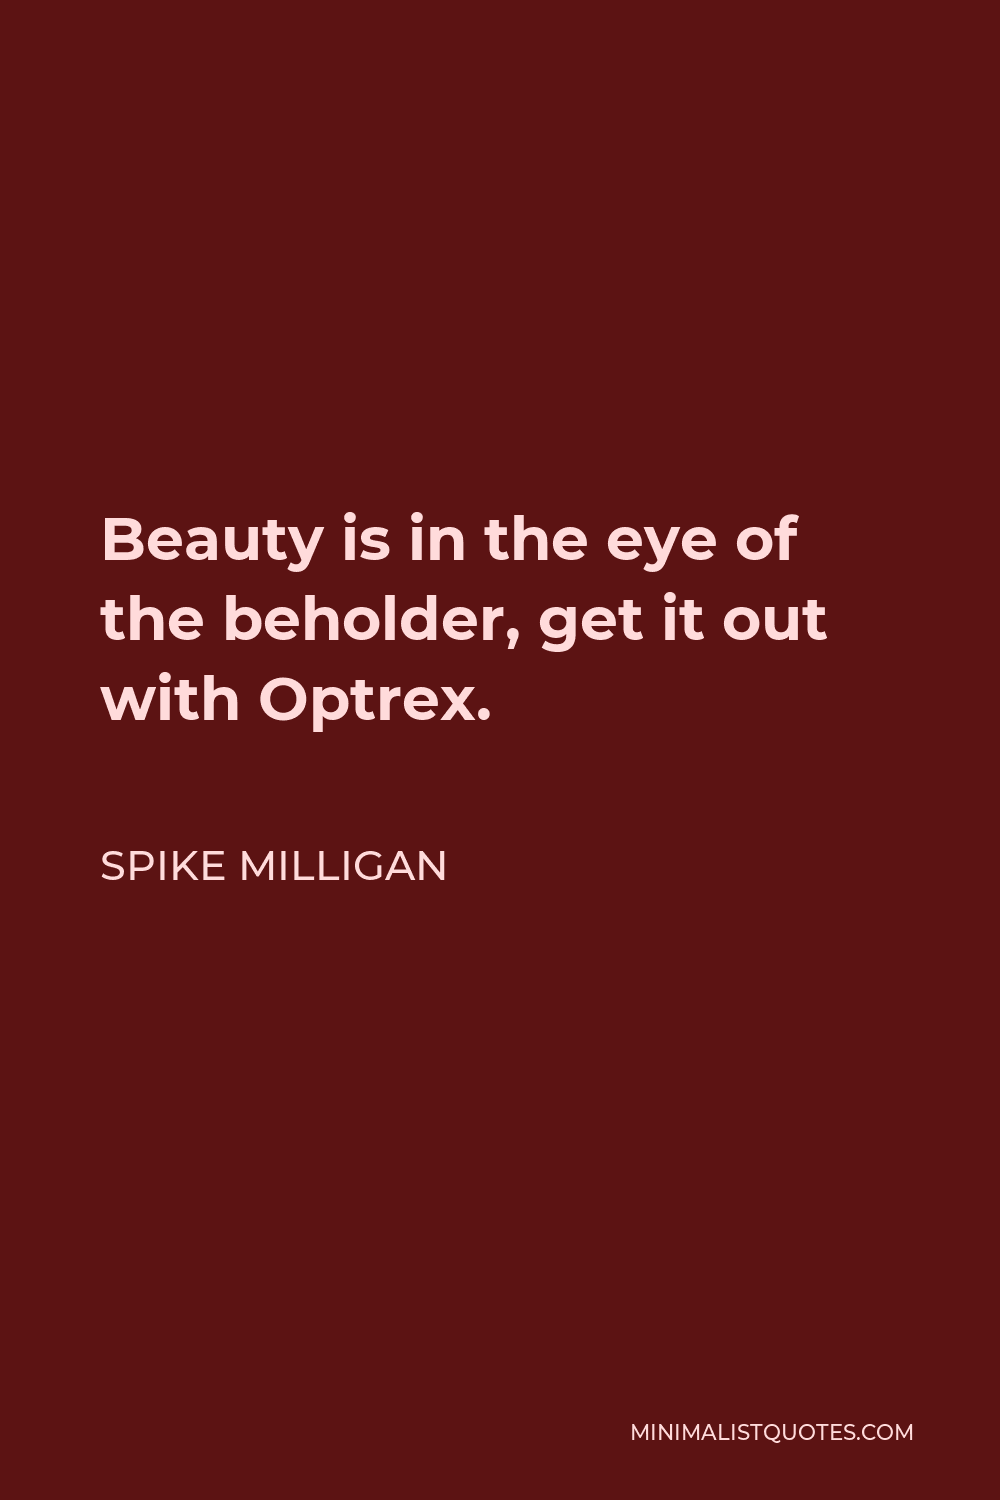 Spike Milligan Quote - Beauty is in the eye of the beholder, get it out with Optrex.